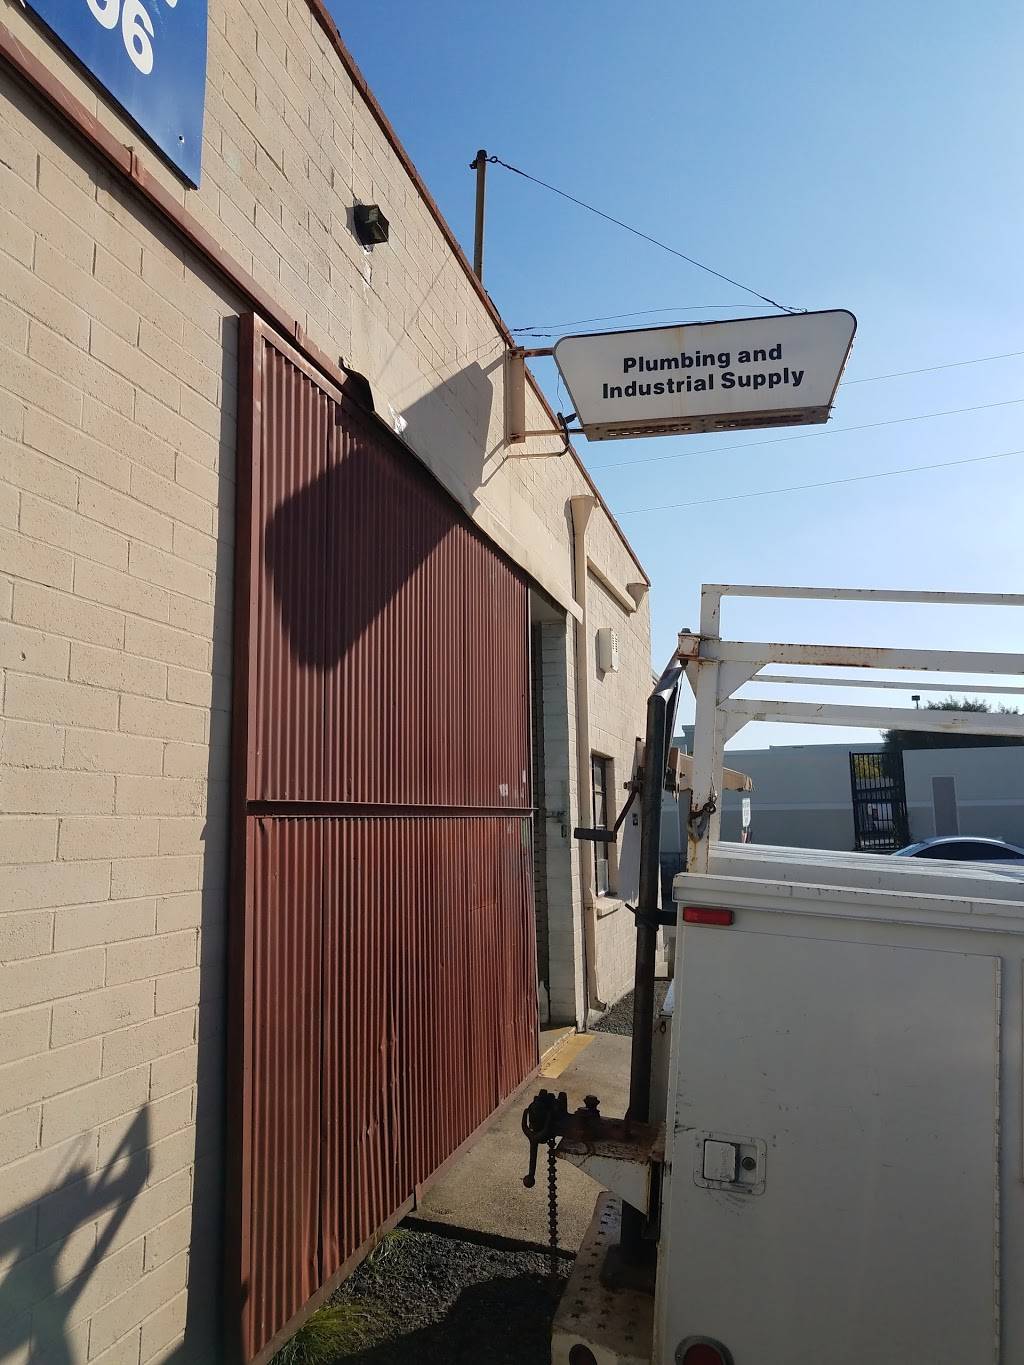 Plumbing and Industrial Supply | 1233 E Ash Ave, Fullerton, CA 92831 | Phone: (714) 525-2396